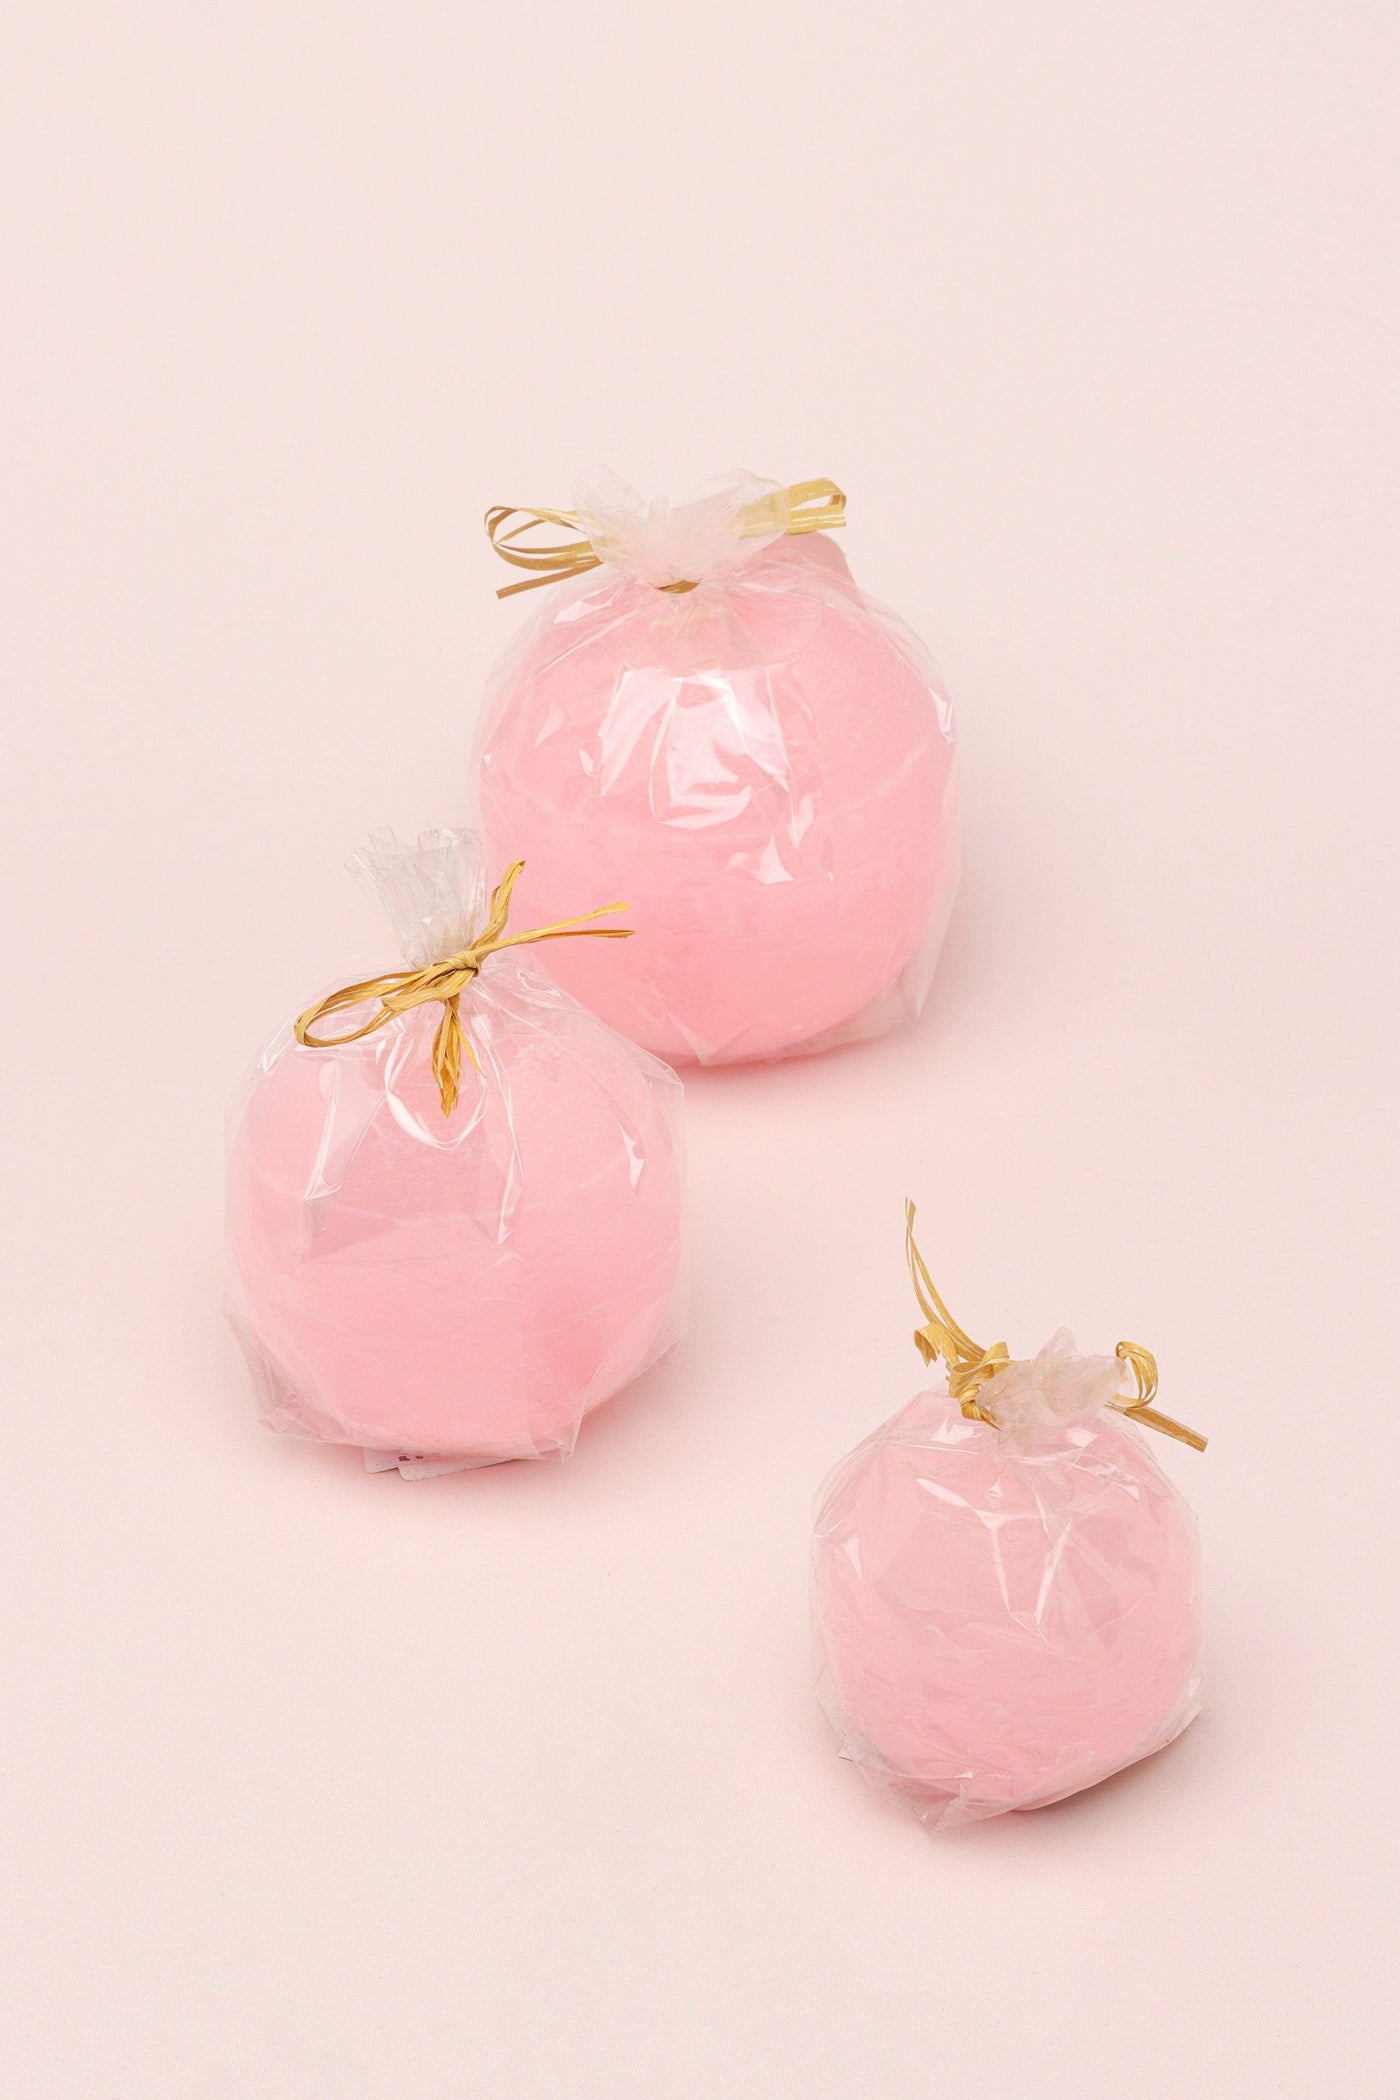 G Decor Candles Georgia Light Pink Ombre Sphere Ball Candles